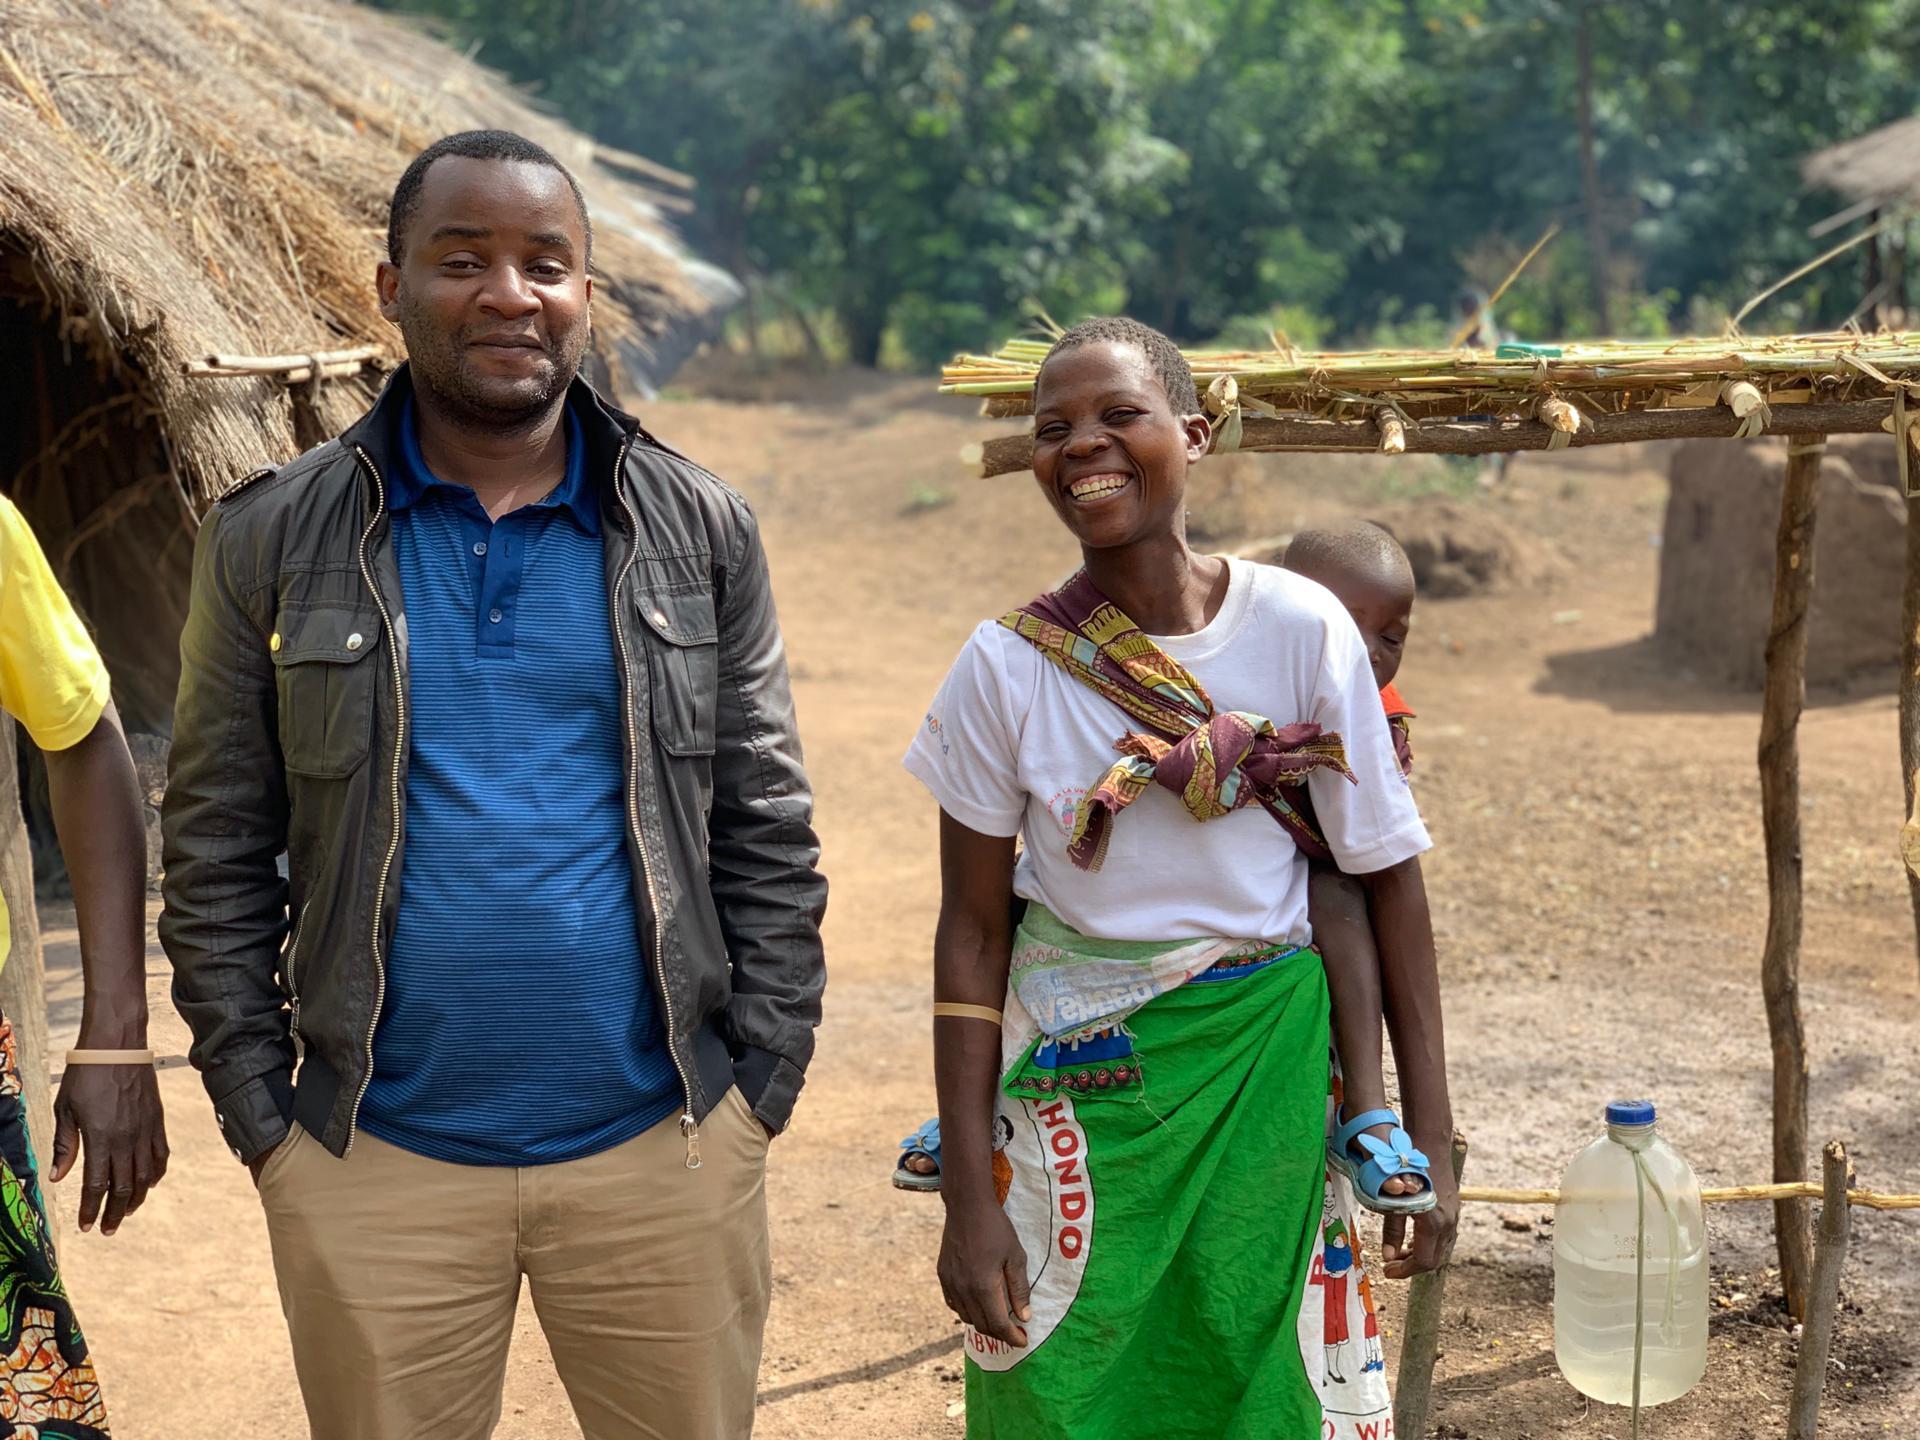 Kondwani and one of the study participants in Chikwawa district. The study participant is wearing a chitenje, t-shirt and wristband given out as part of the Hygienic Family intervention.  